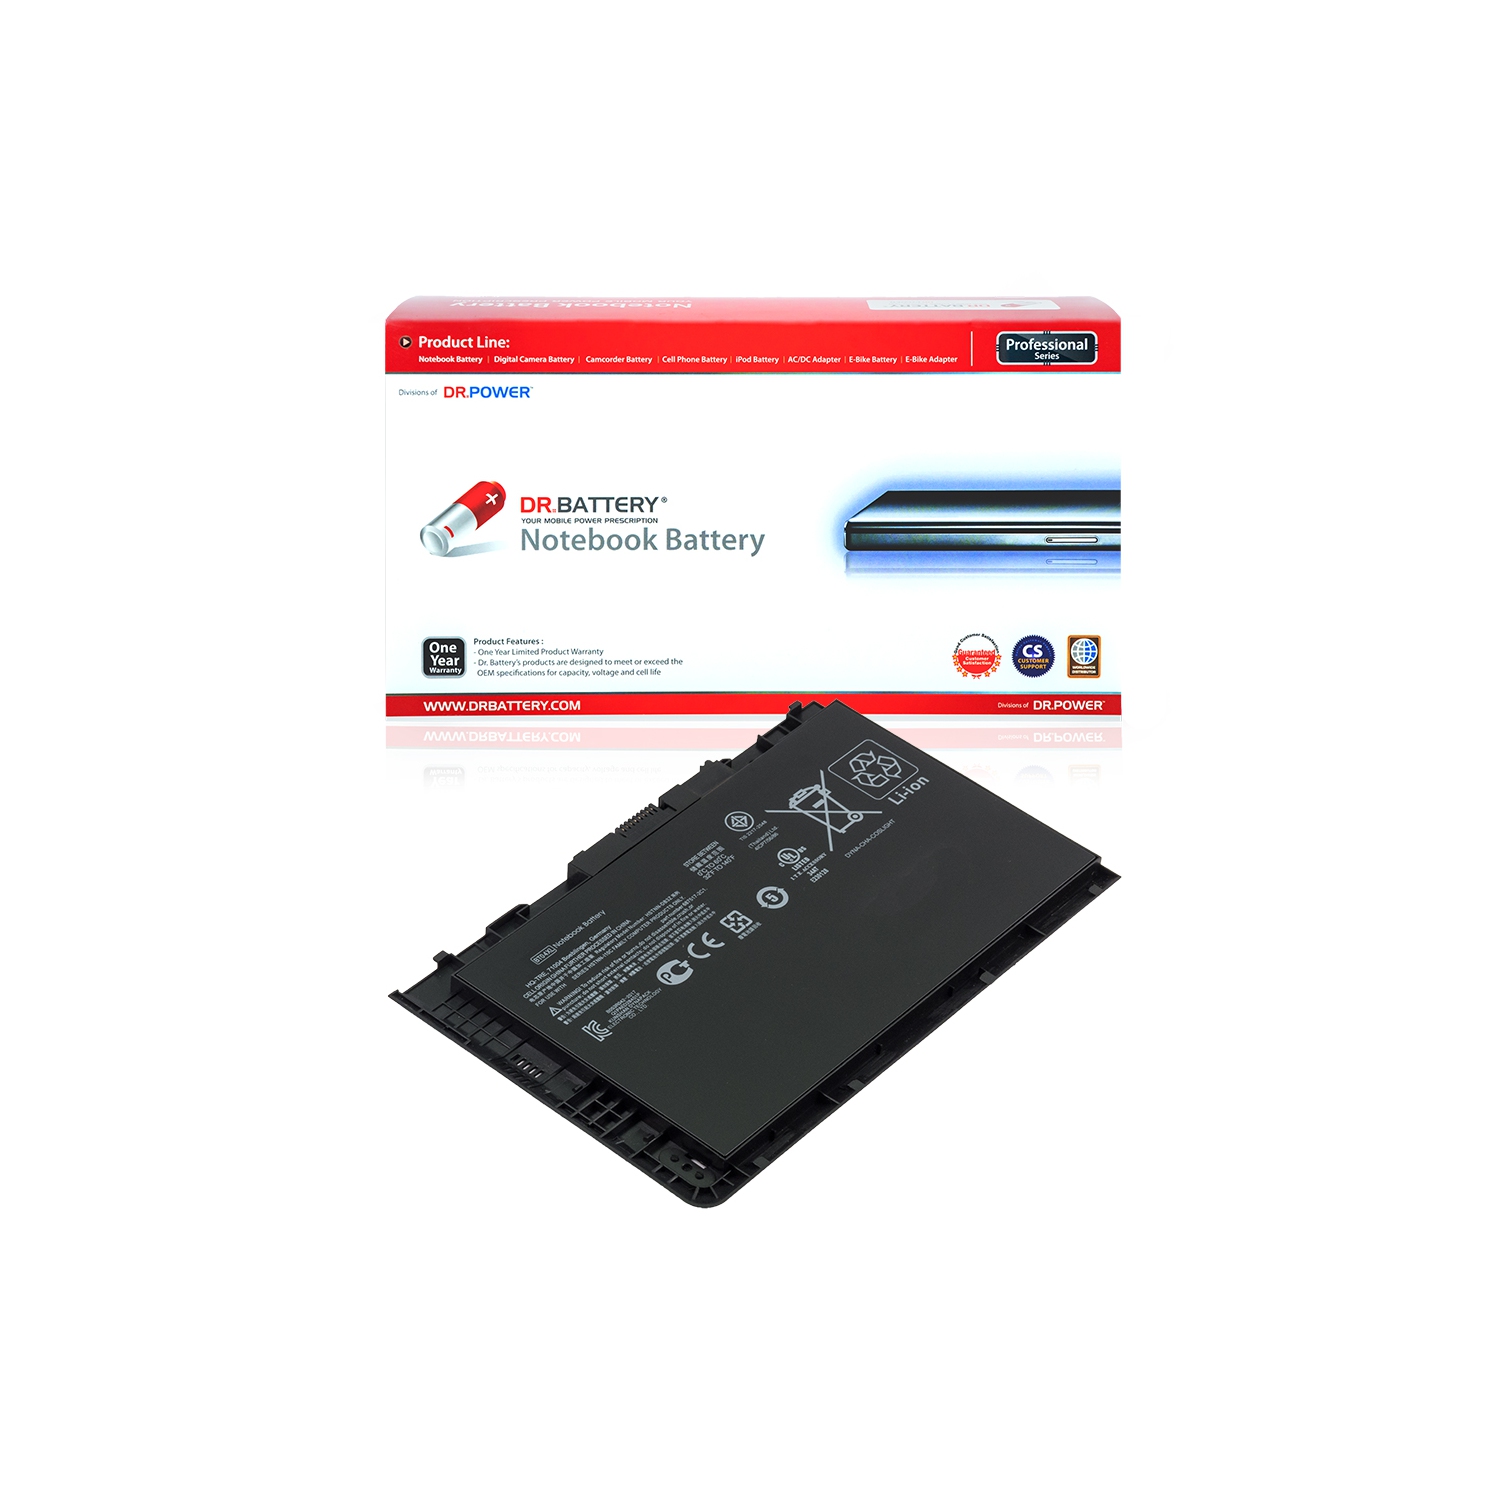 DR. BATTERY - Replacement for HP EliteBook Folio 9470m P3E05UT / 9470m P3E06UT / 9470m P3E07UT / BT04 / BT04XL / H4Q47AA